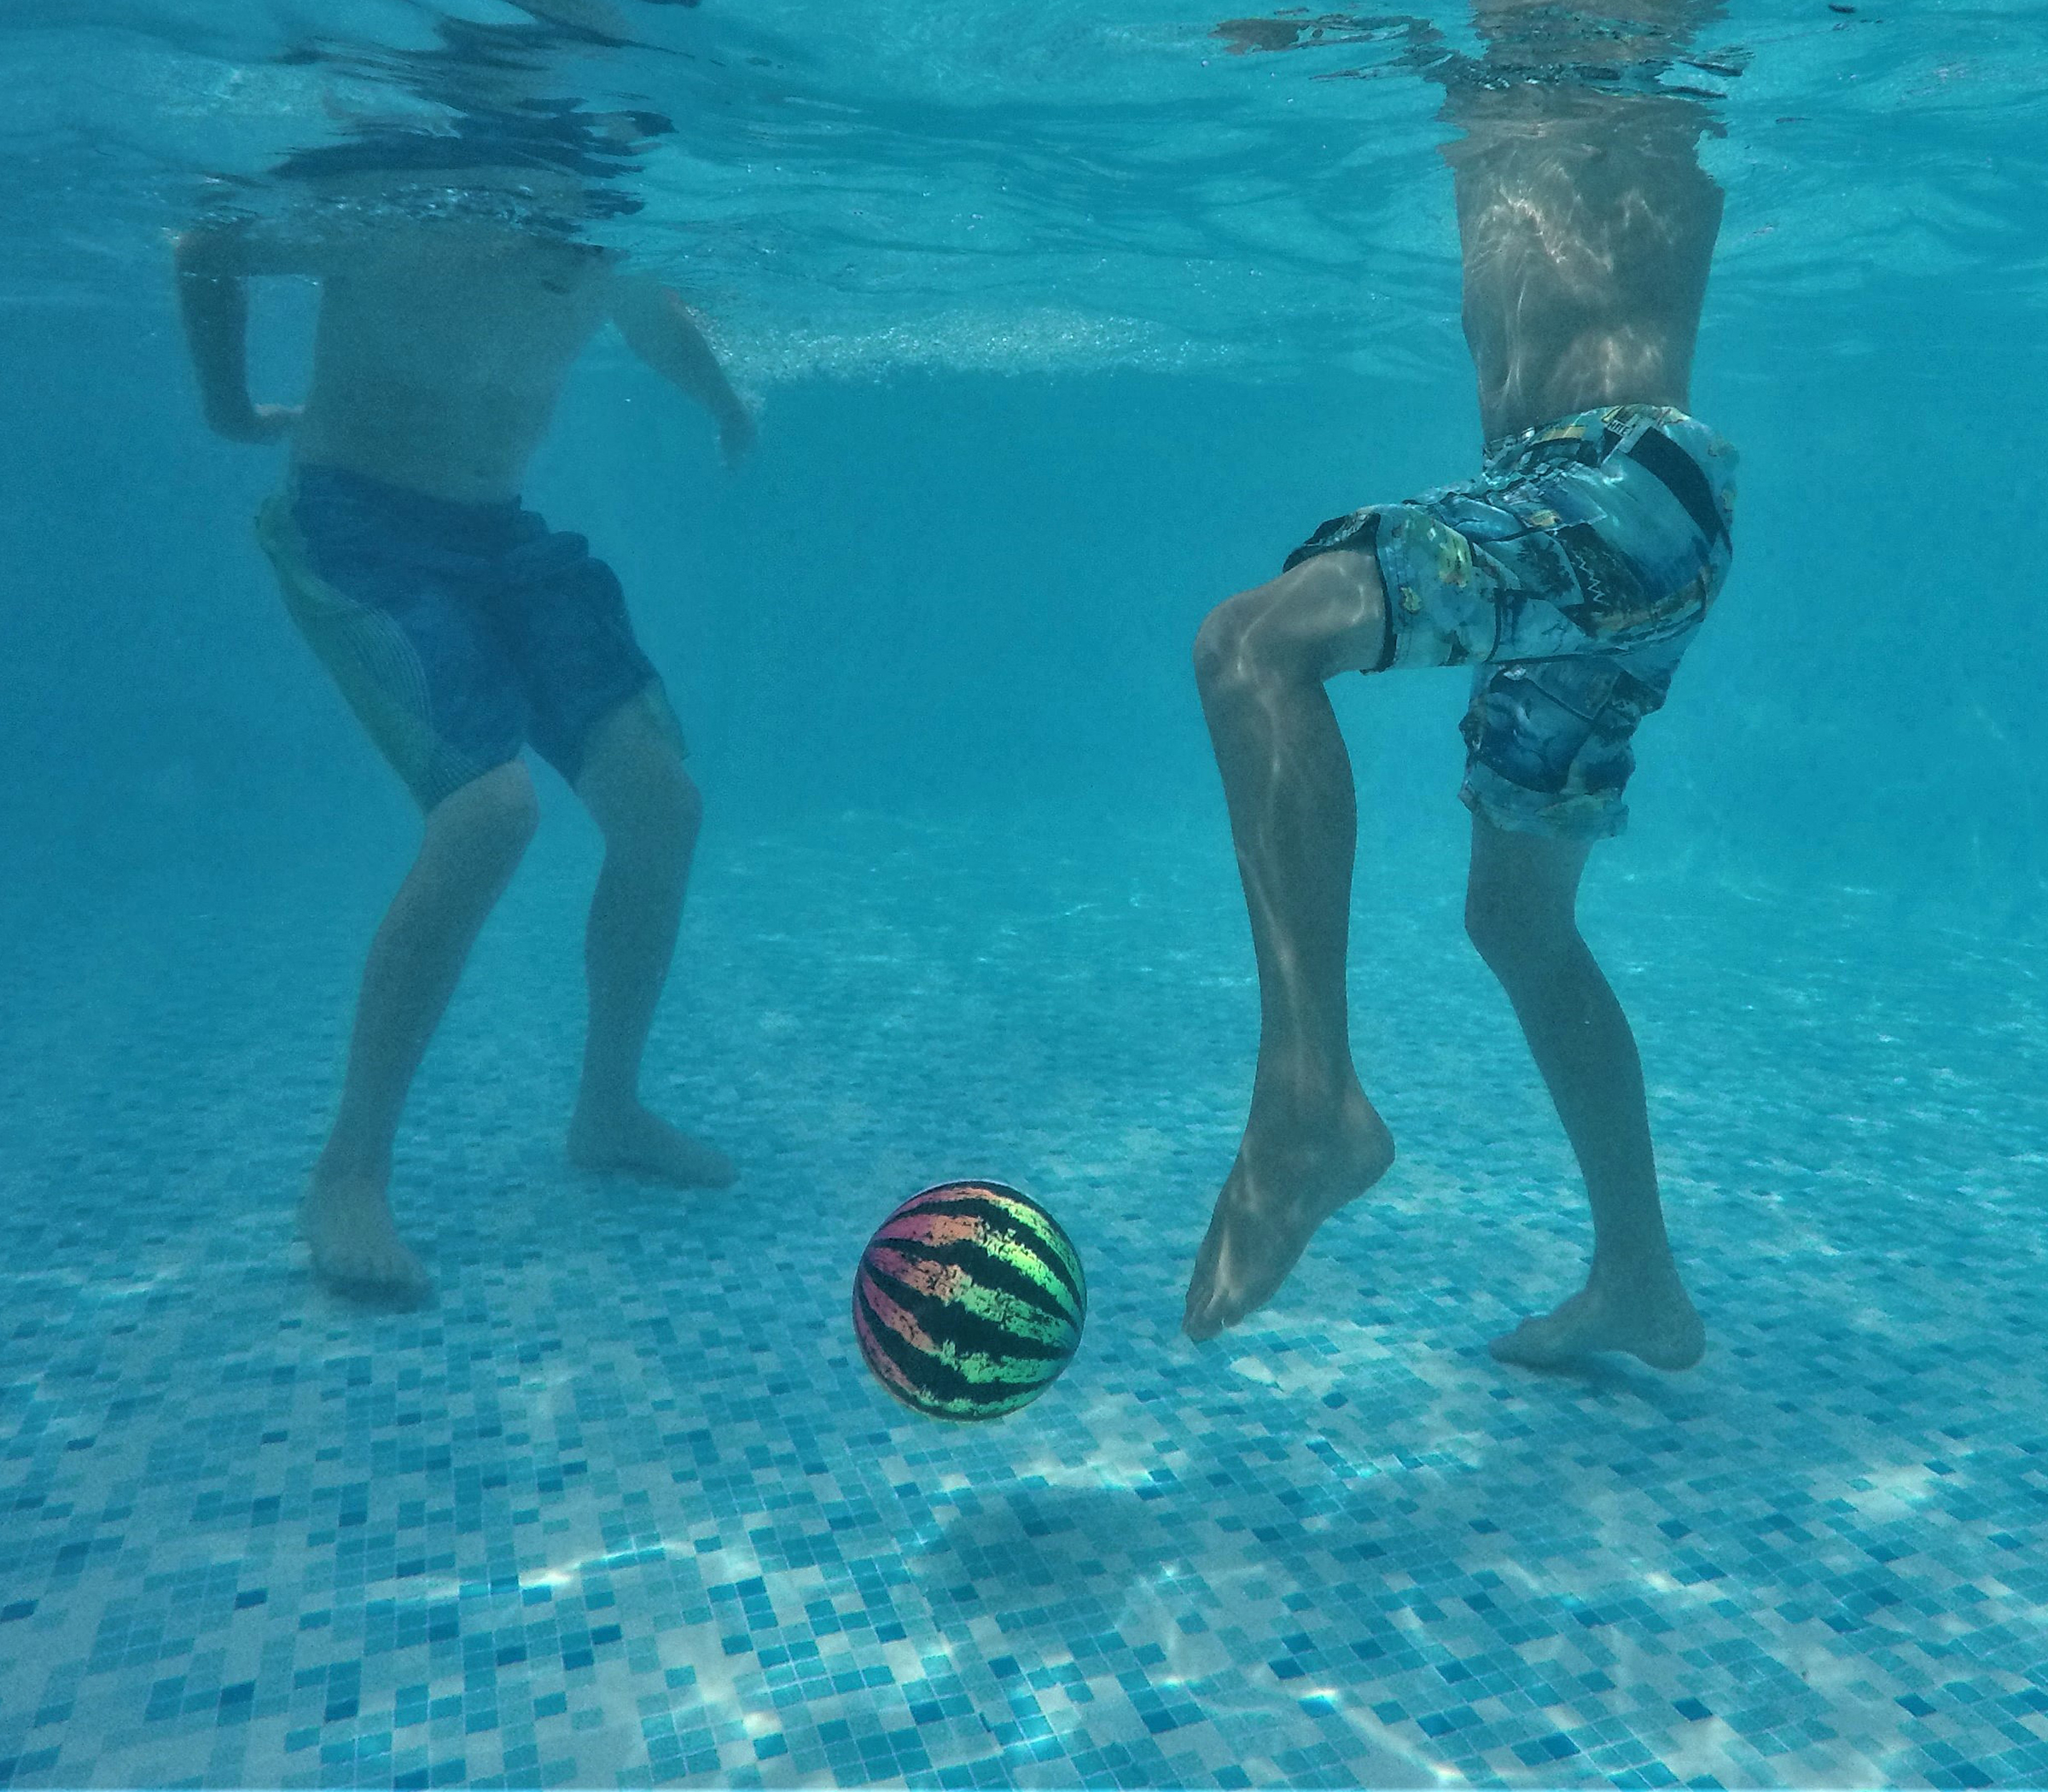 Play soccer under water